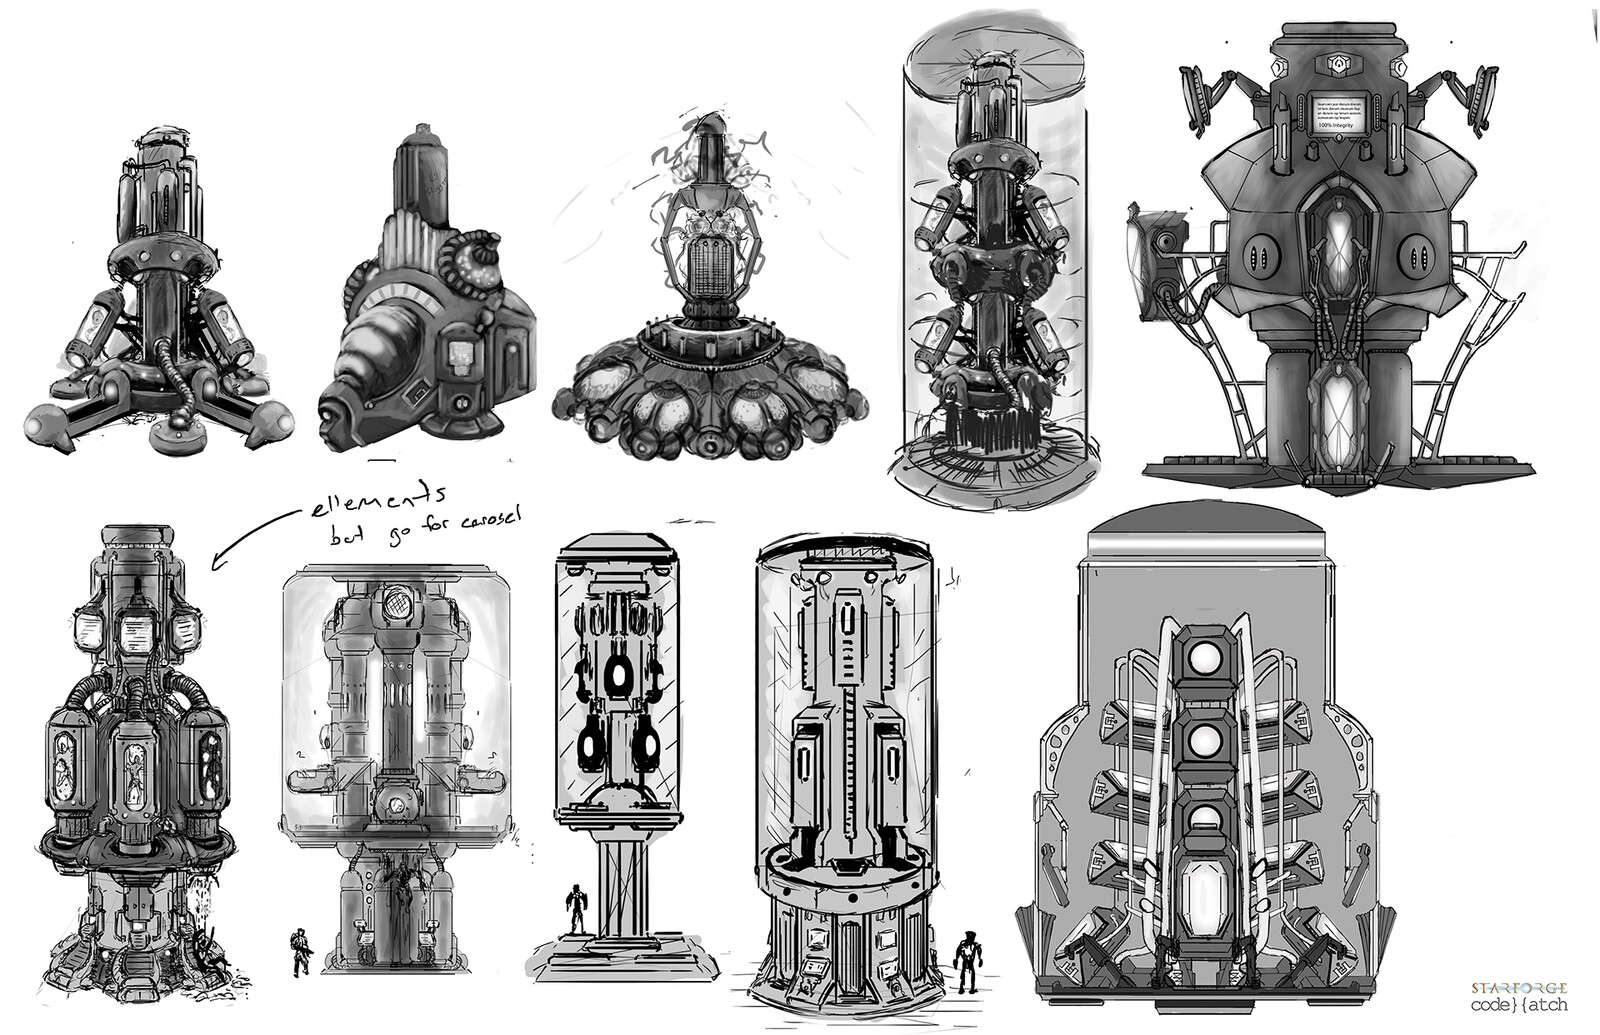 Vat Designs. These roughs departed from the grown human concept and explored cryo pods.